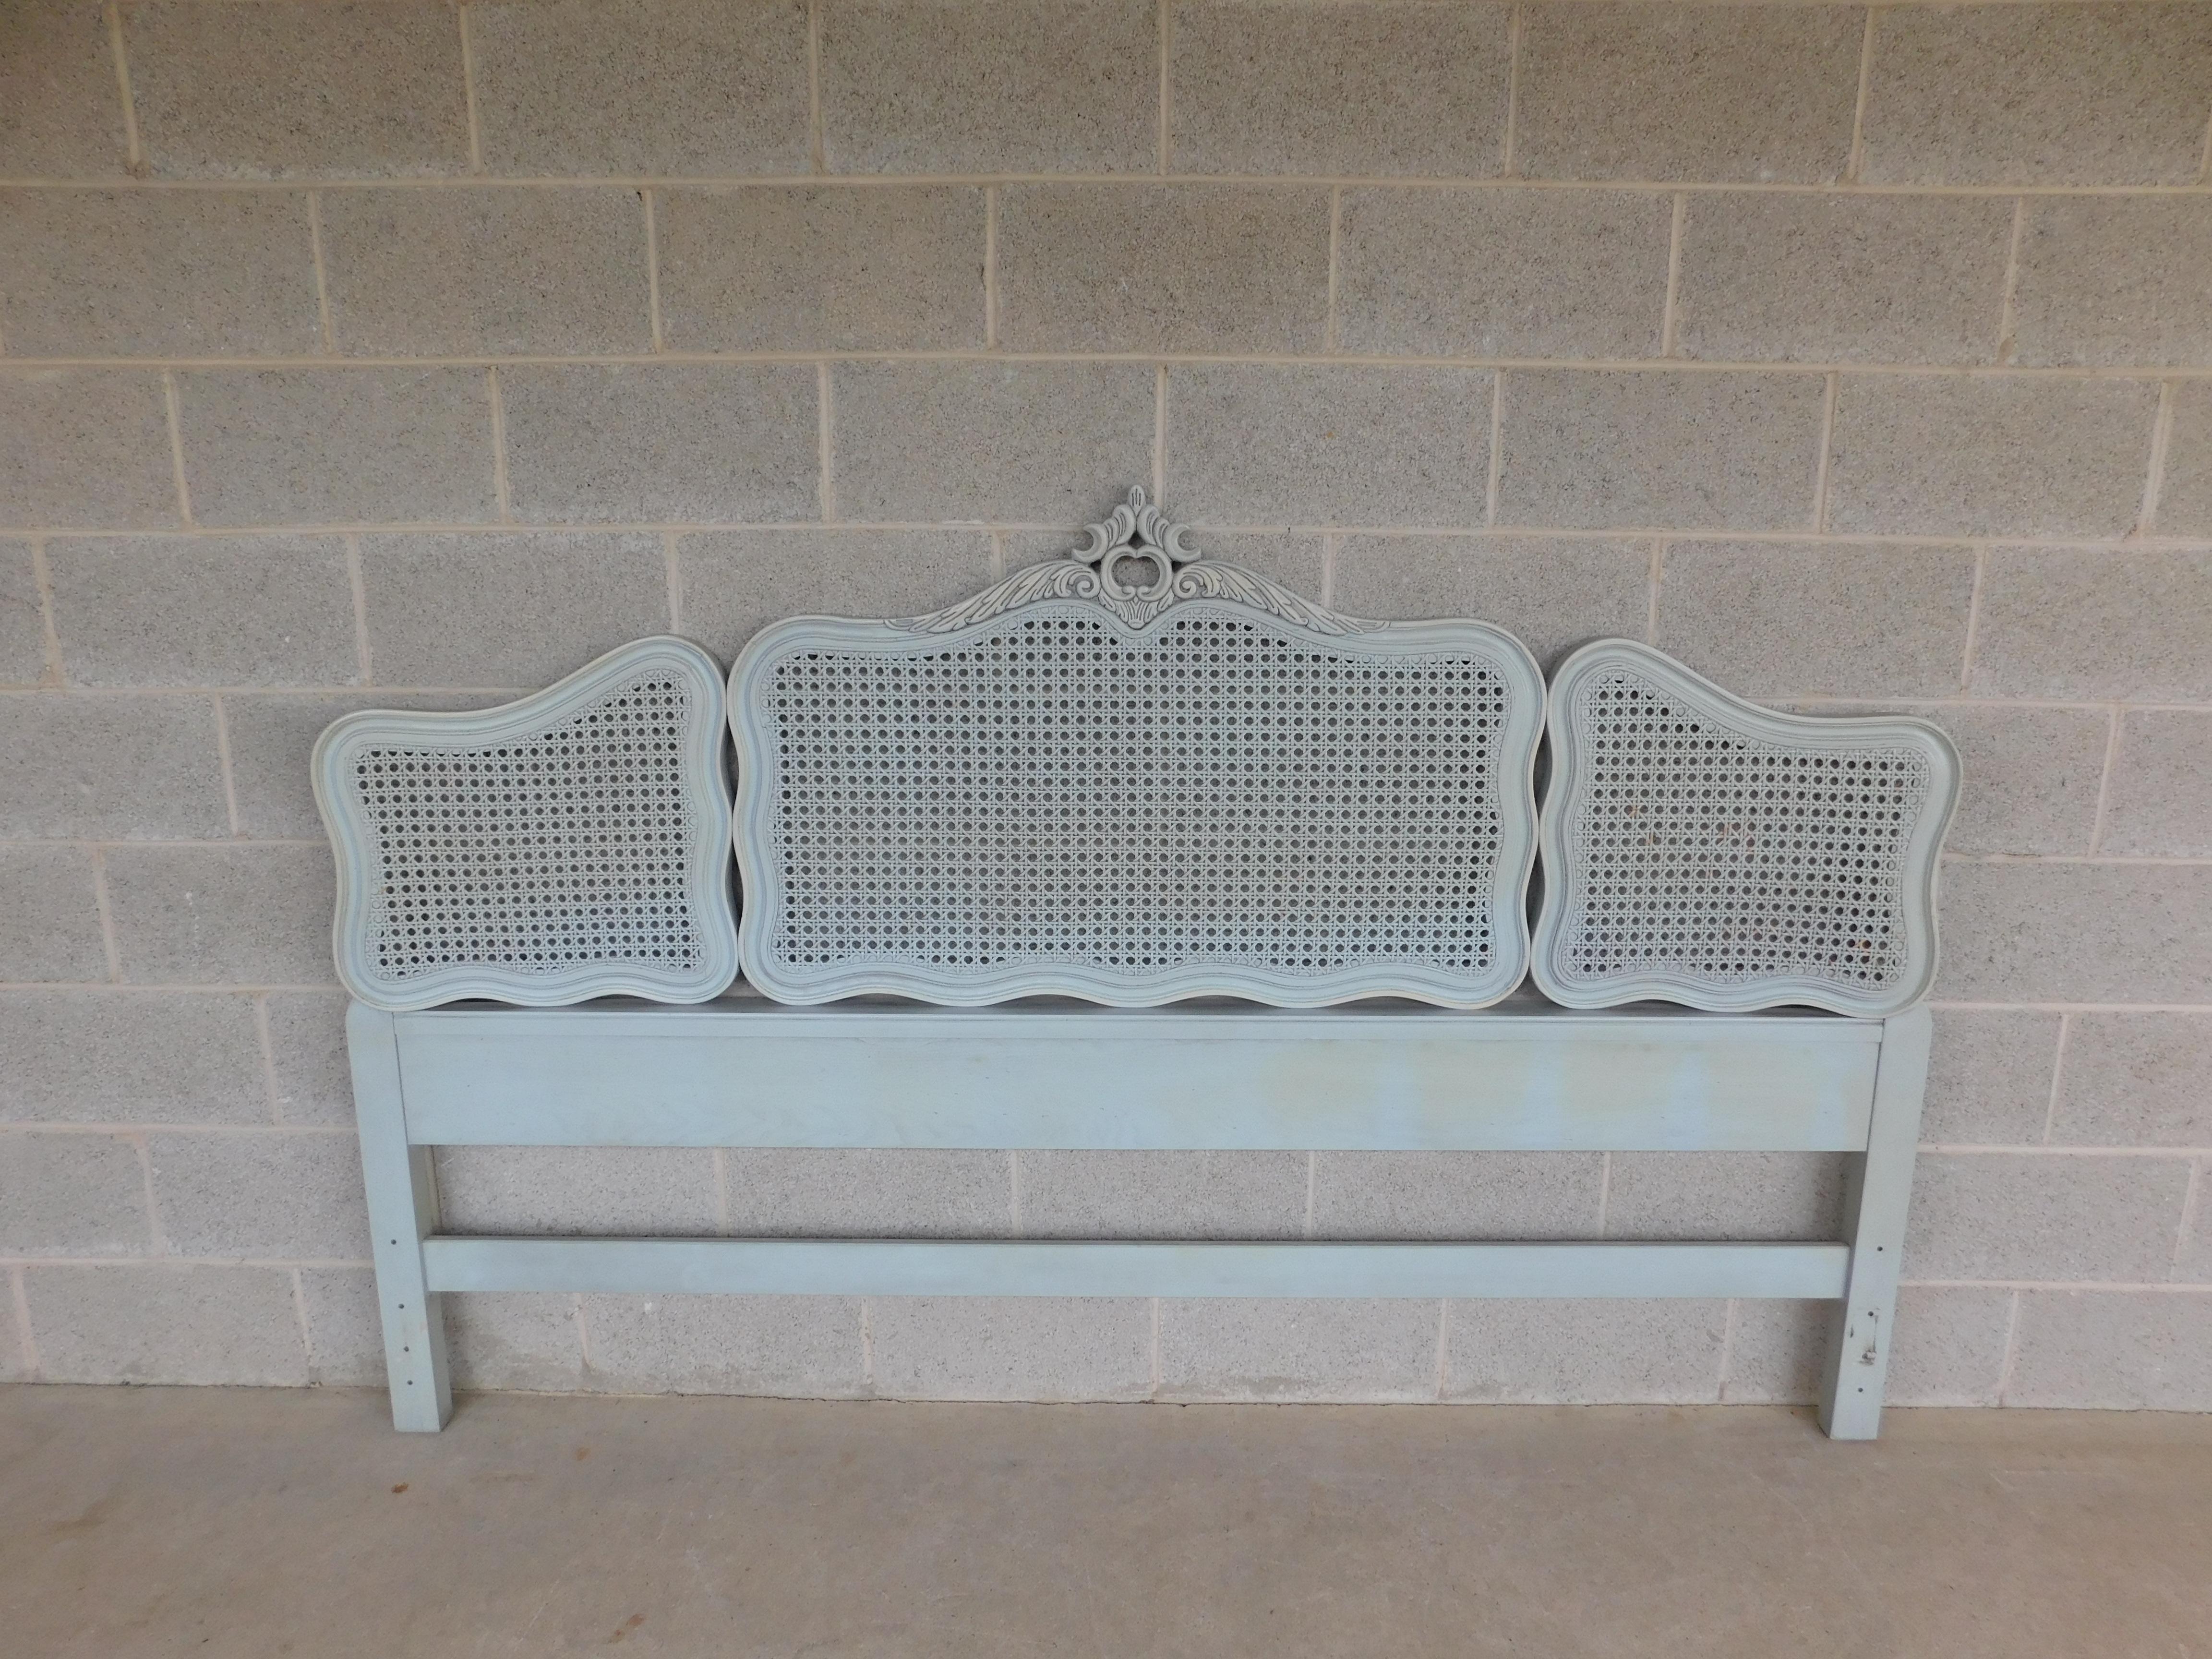 King size headboard. Features 3 part caned back finished in french blue original finish, The left and right corners bevel outward approx 5 inches.